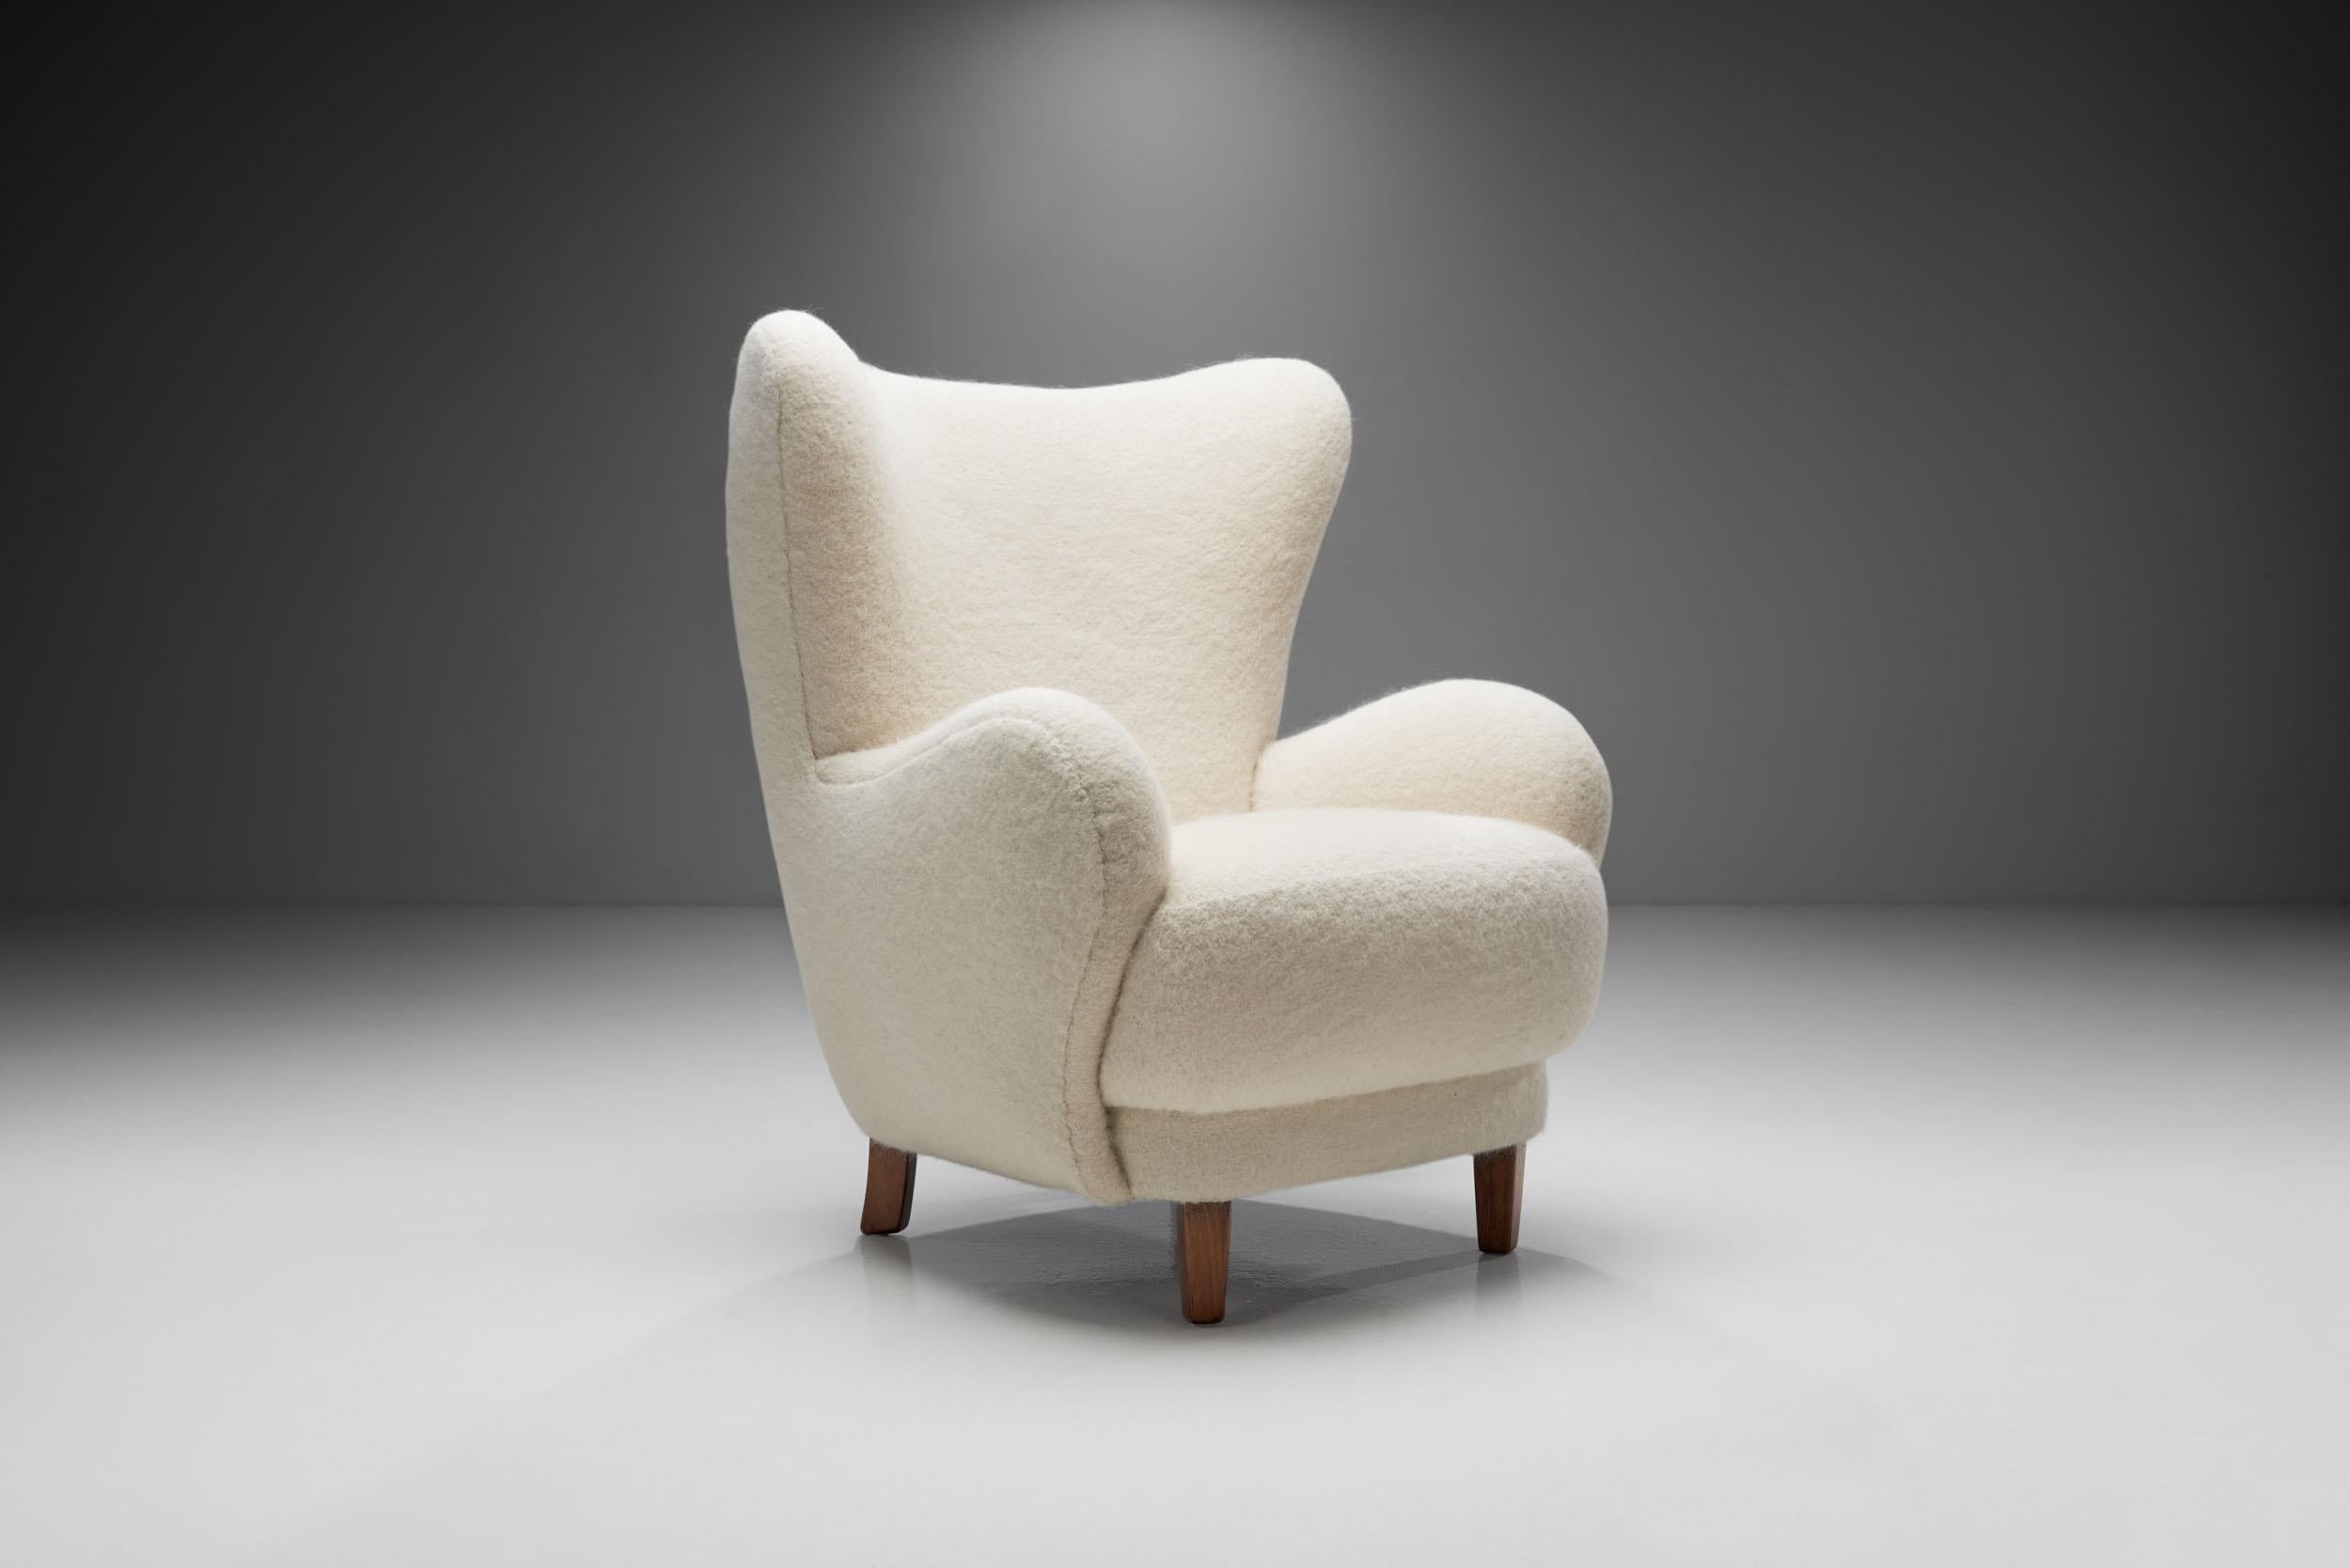 This unique 1940s winged easy chair is a great representation of the quality and craftsmanship of Danish master cabinetmakers and the immediately recognizable characteristics of Scandinavian design. 

The welcoming, rounded shape of the voluminous